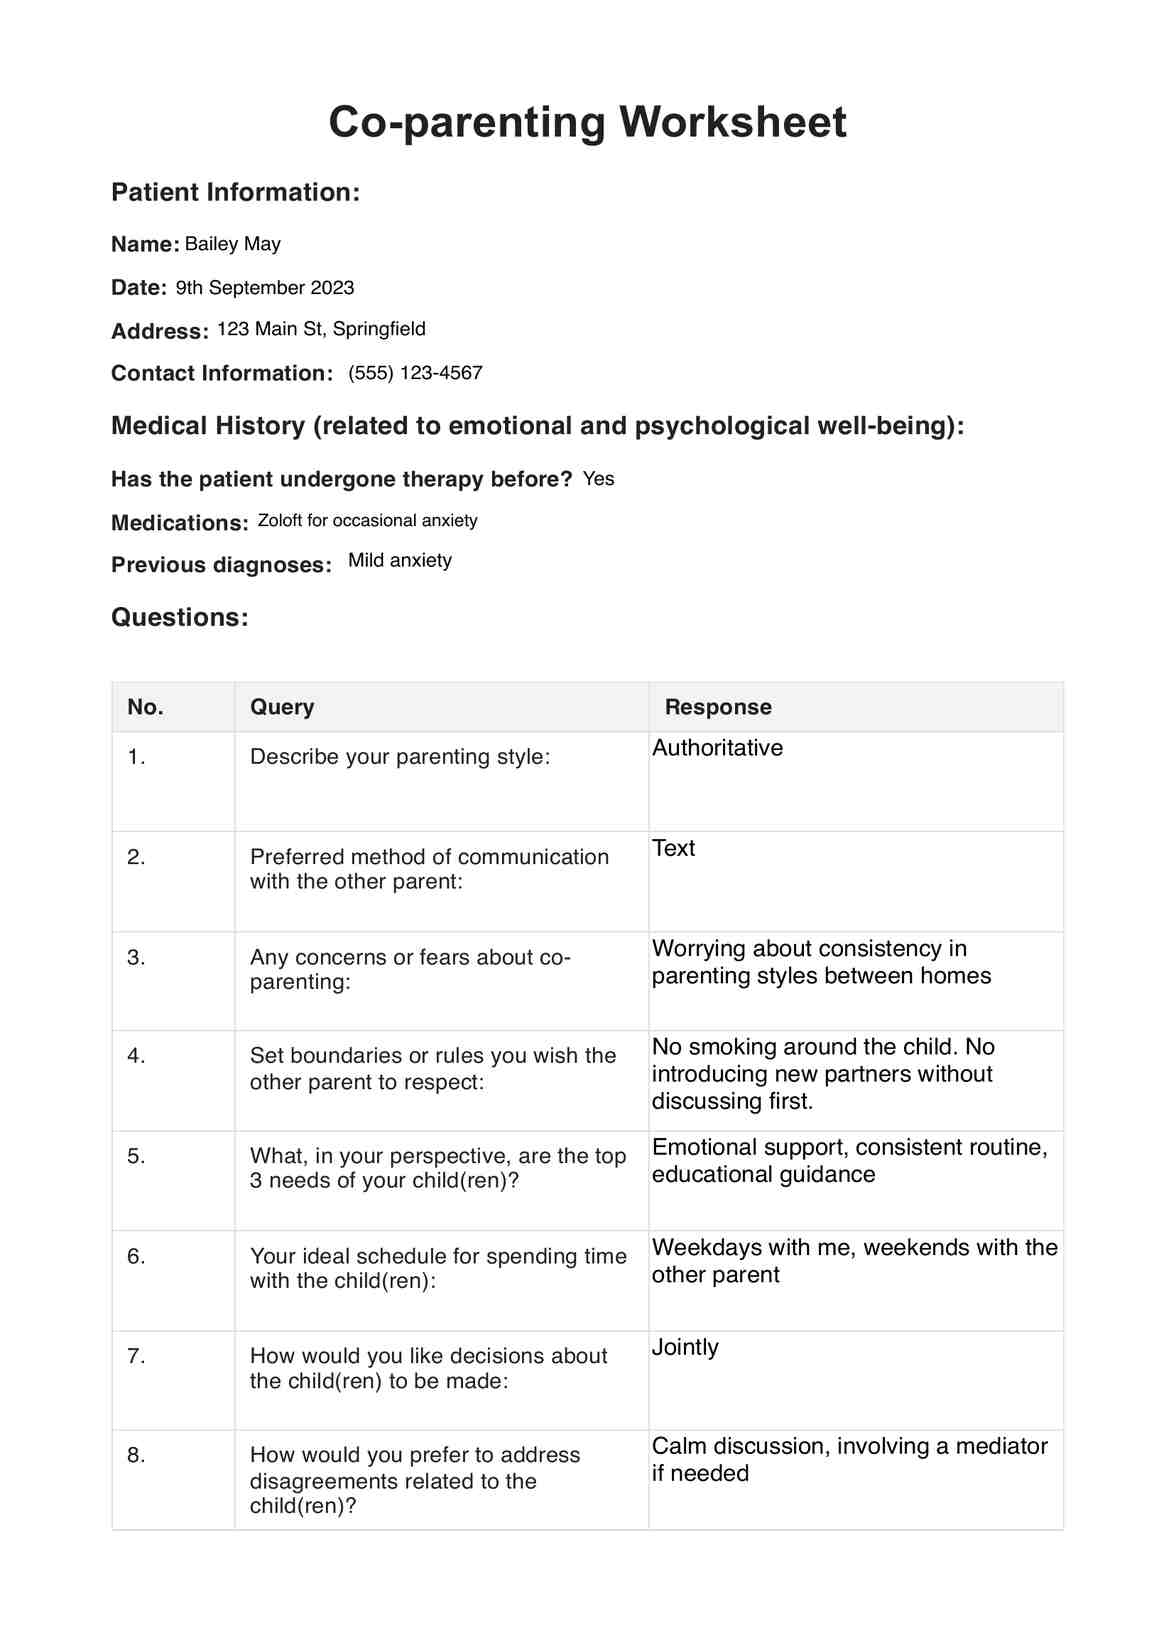 Co-parenting Worksheets PDF Example